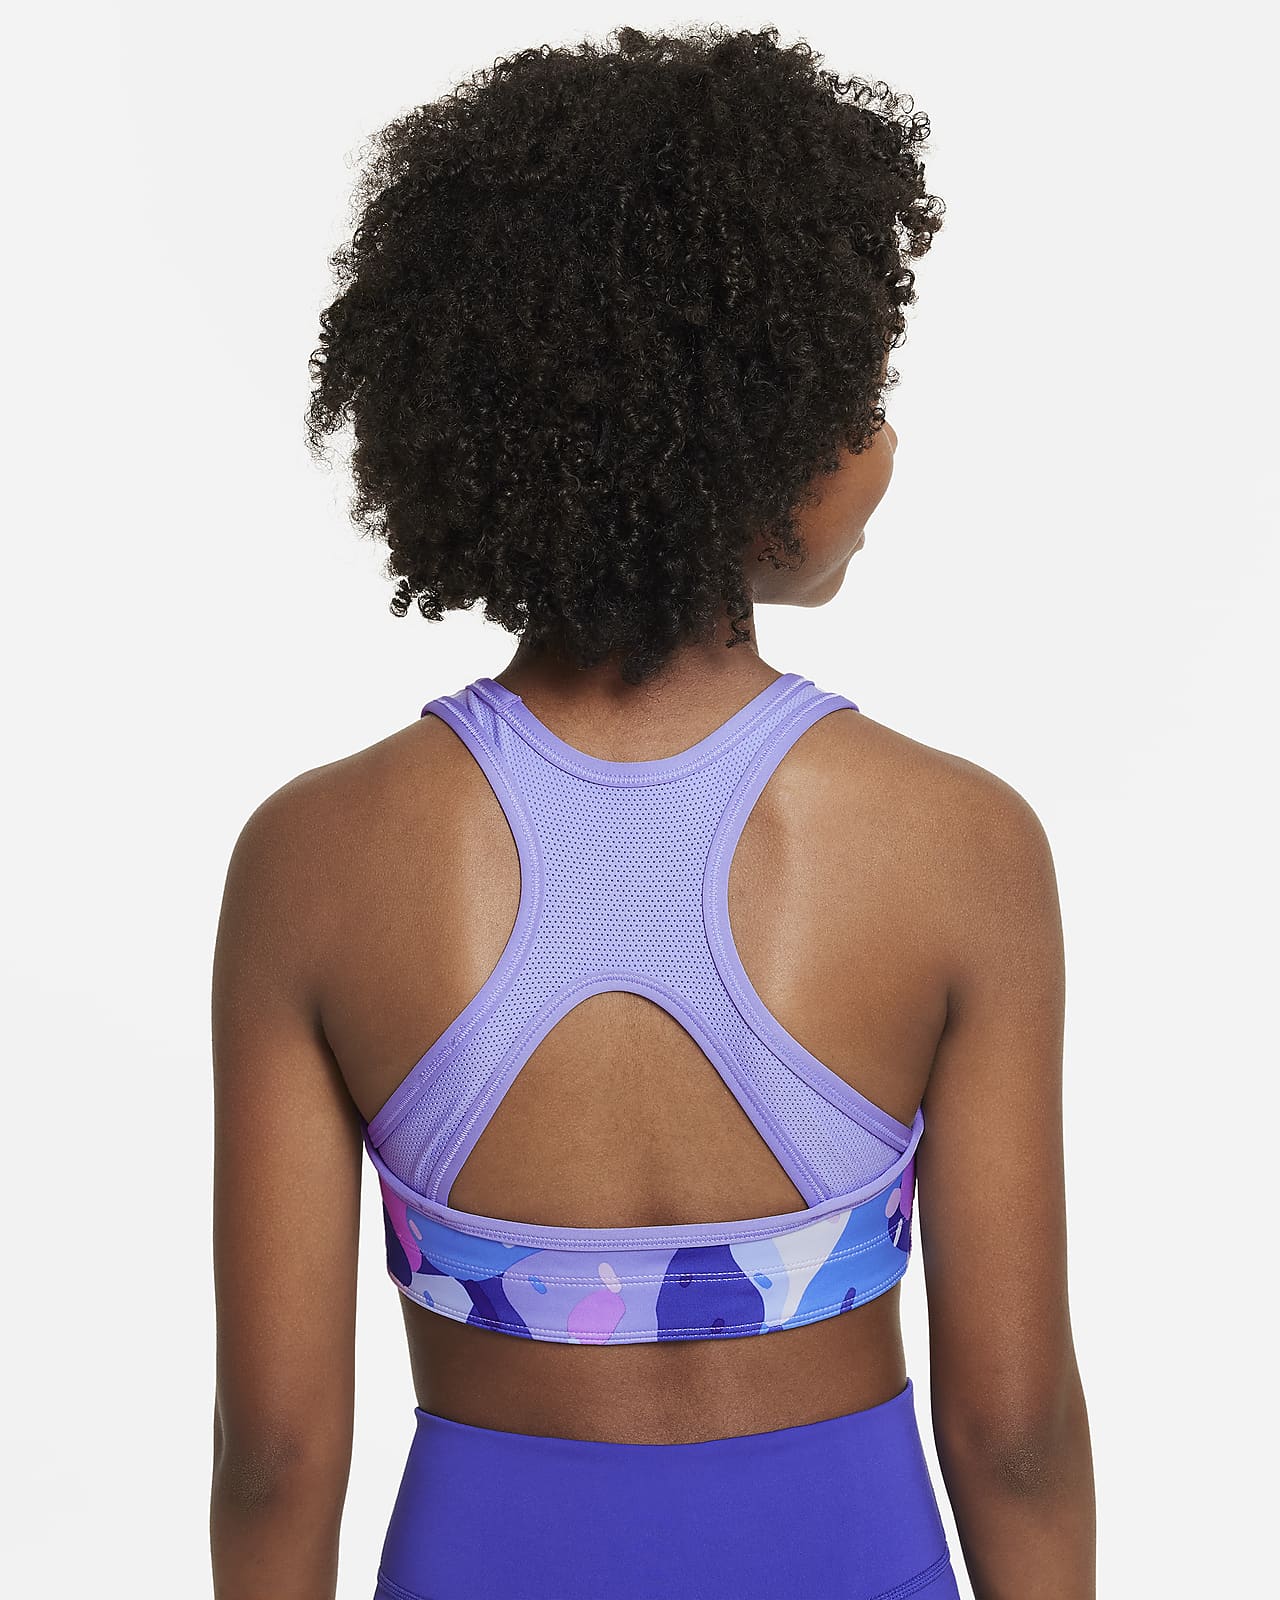 Full Price At Least 20% Sustainable Material Sports Bras. Nike CA